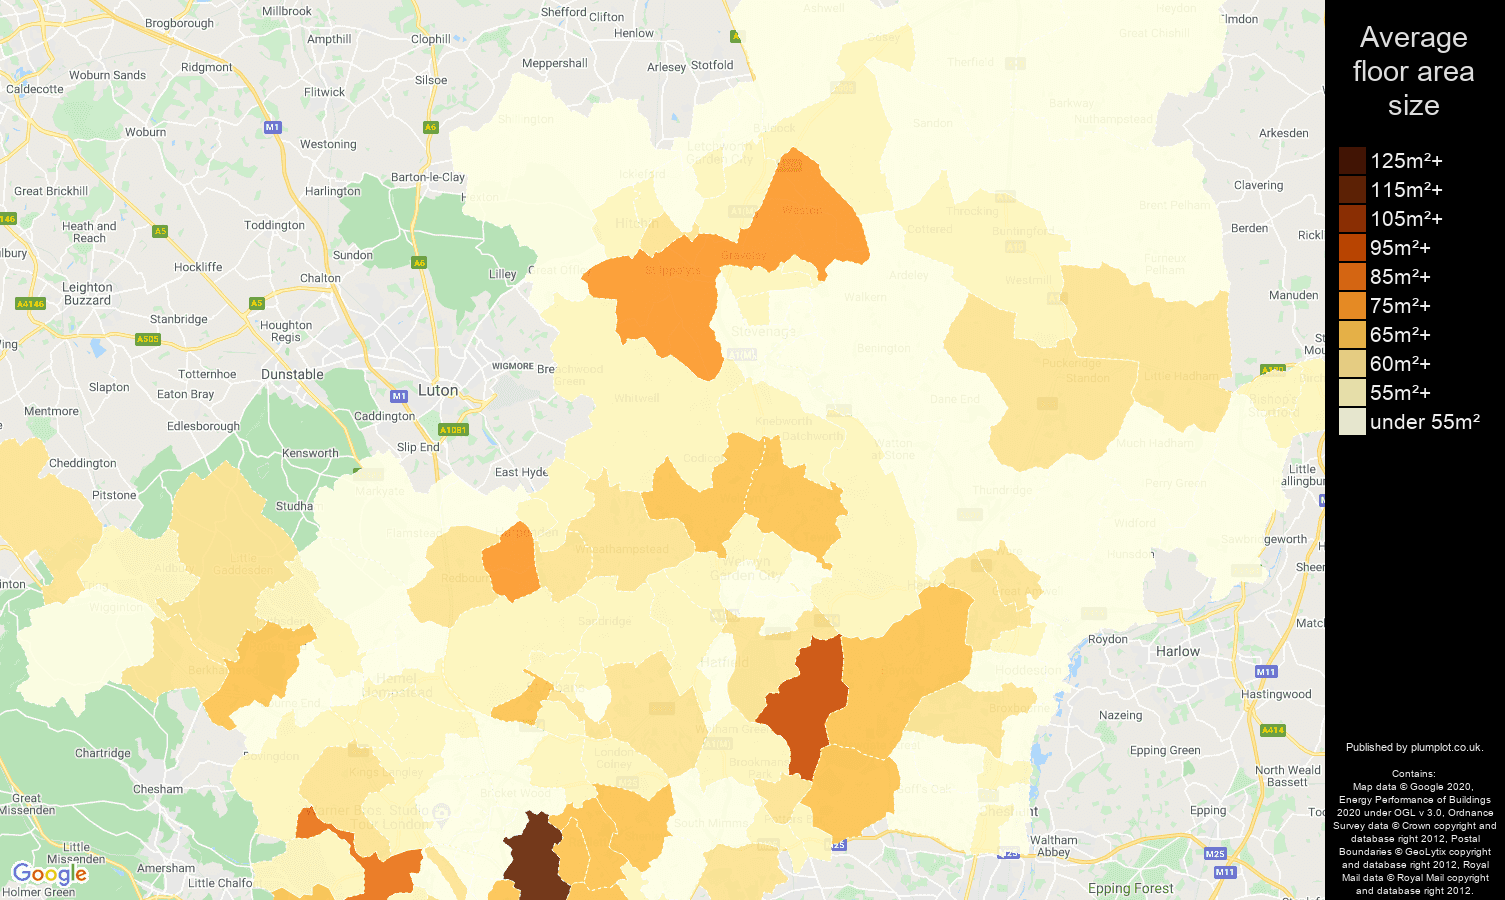 Hertfordshire map of average floor area size of flats